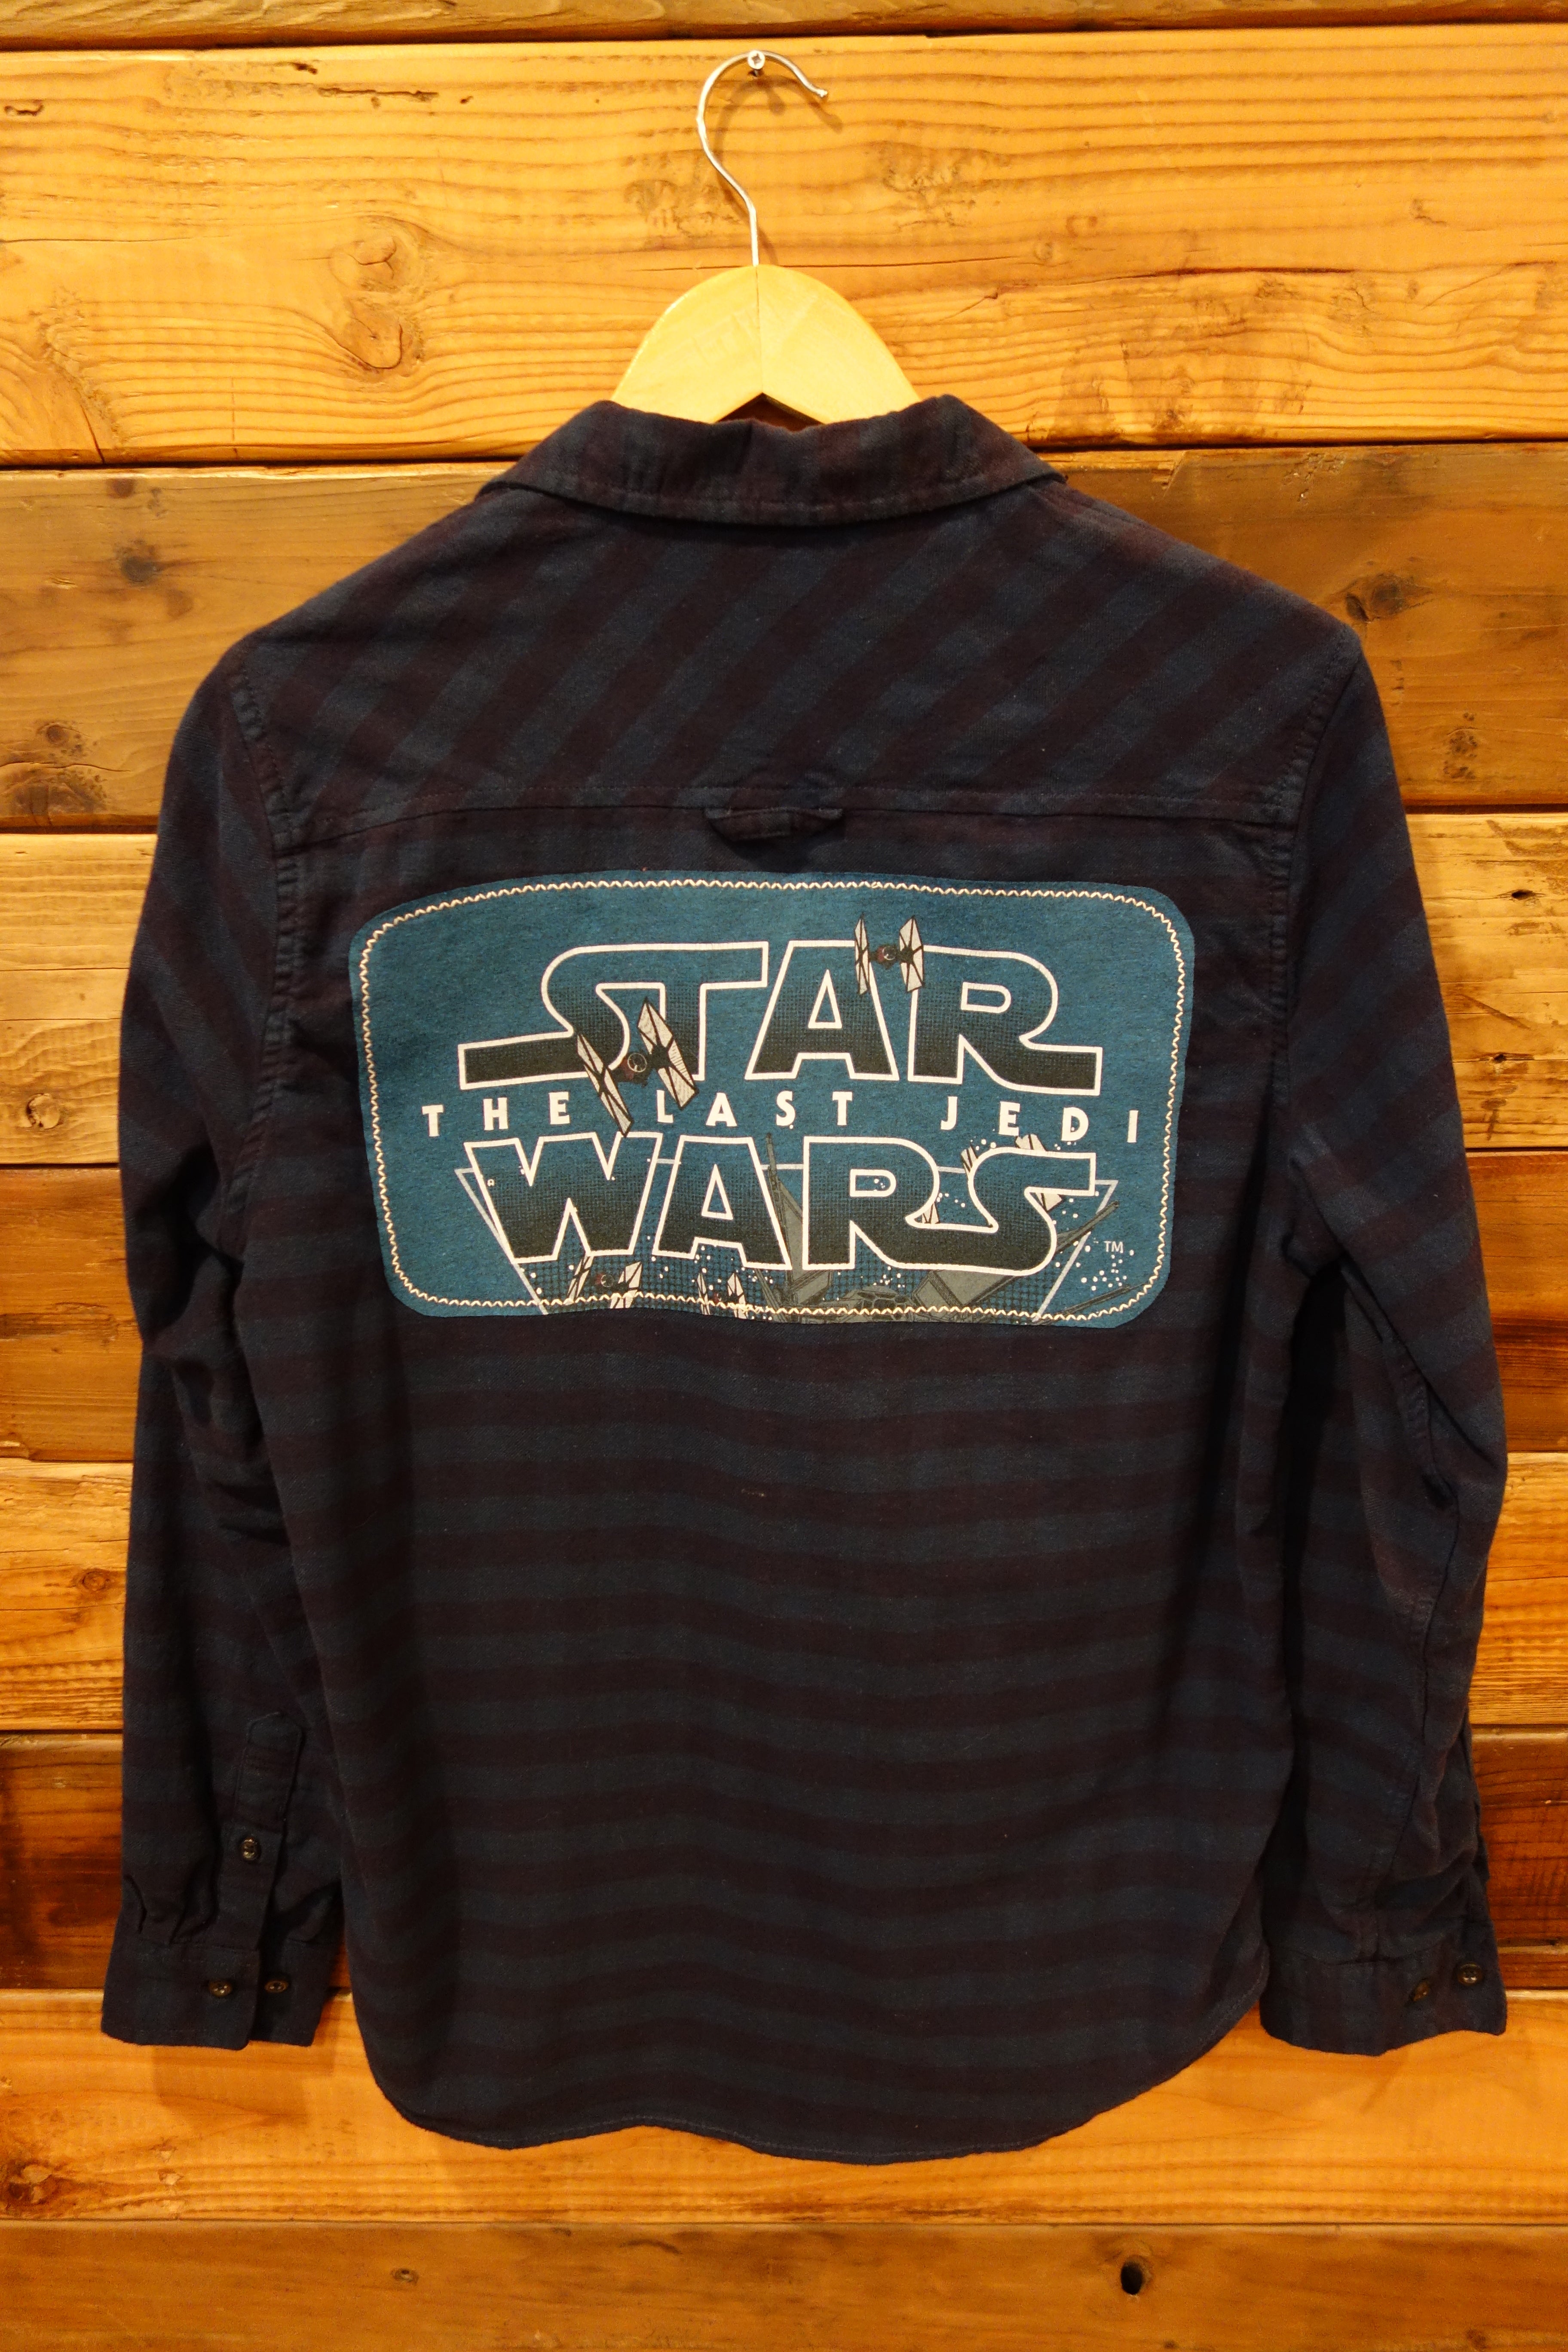 Paper denim and cloth premium one of a kind vintage flannel Star Wars The Last Jedi 